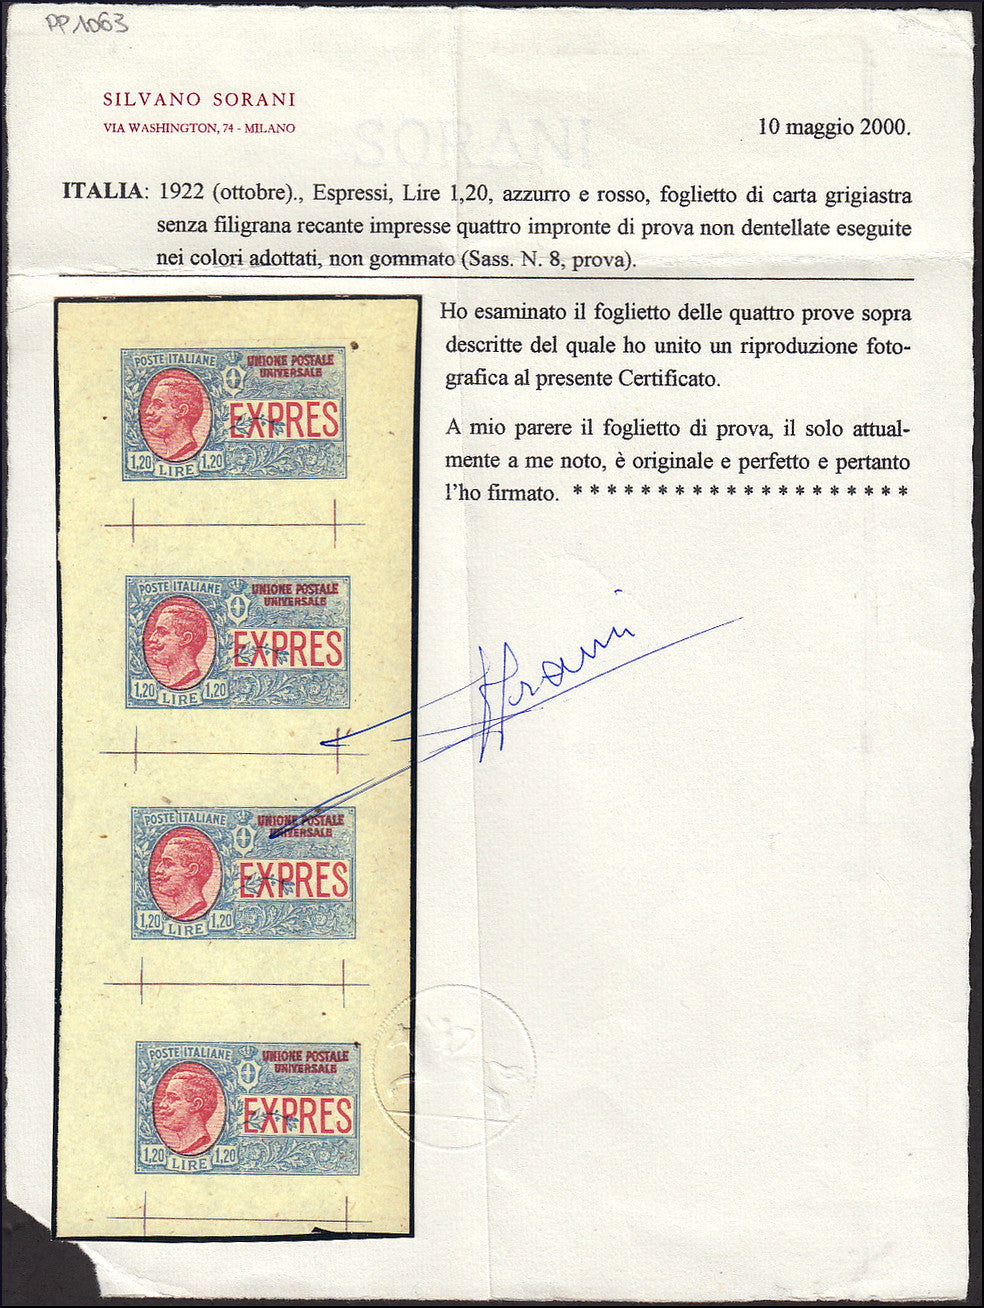 PP1056 - 1922 - L. 1.20 light blue and red, proof sheet on greyish paper and without watermark, (E8, proof).